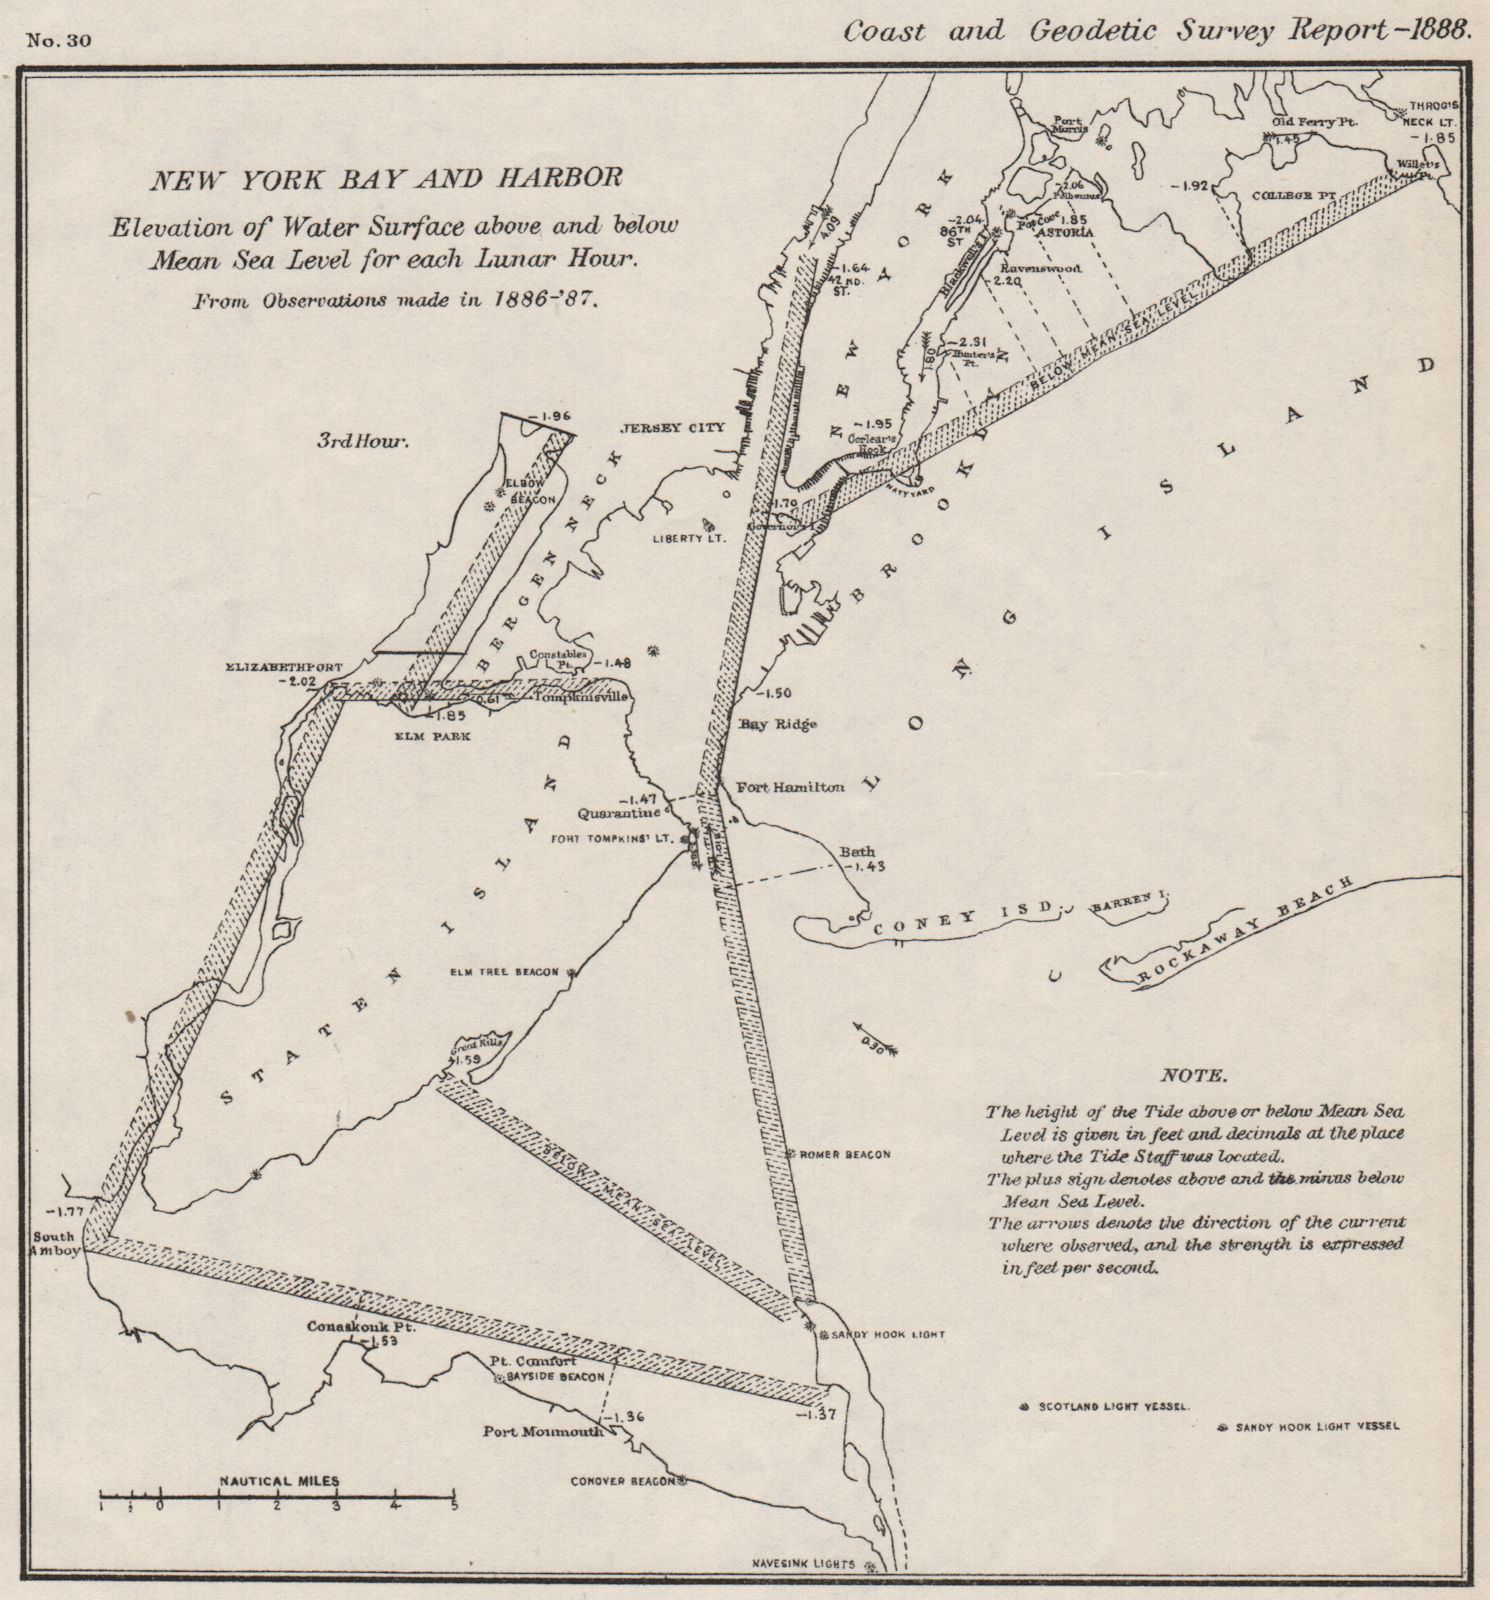 Associate Product NEW YORK BAY/HARBOR. Water level v mean sea level 3rd Lunar Hour. USCGS 1889 map